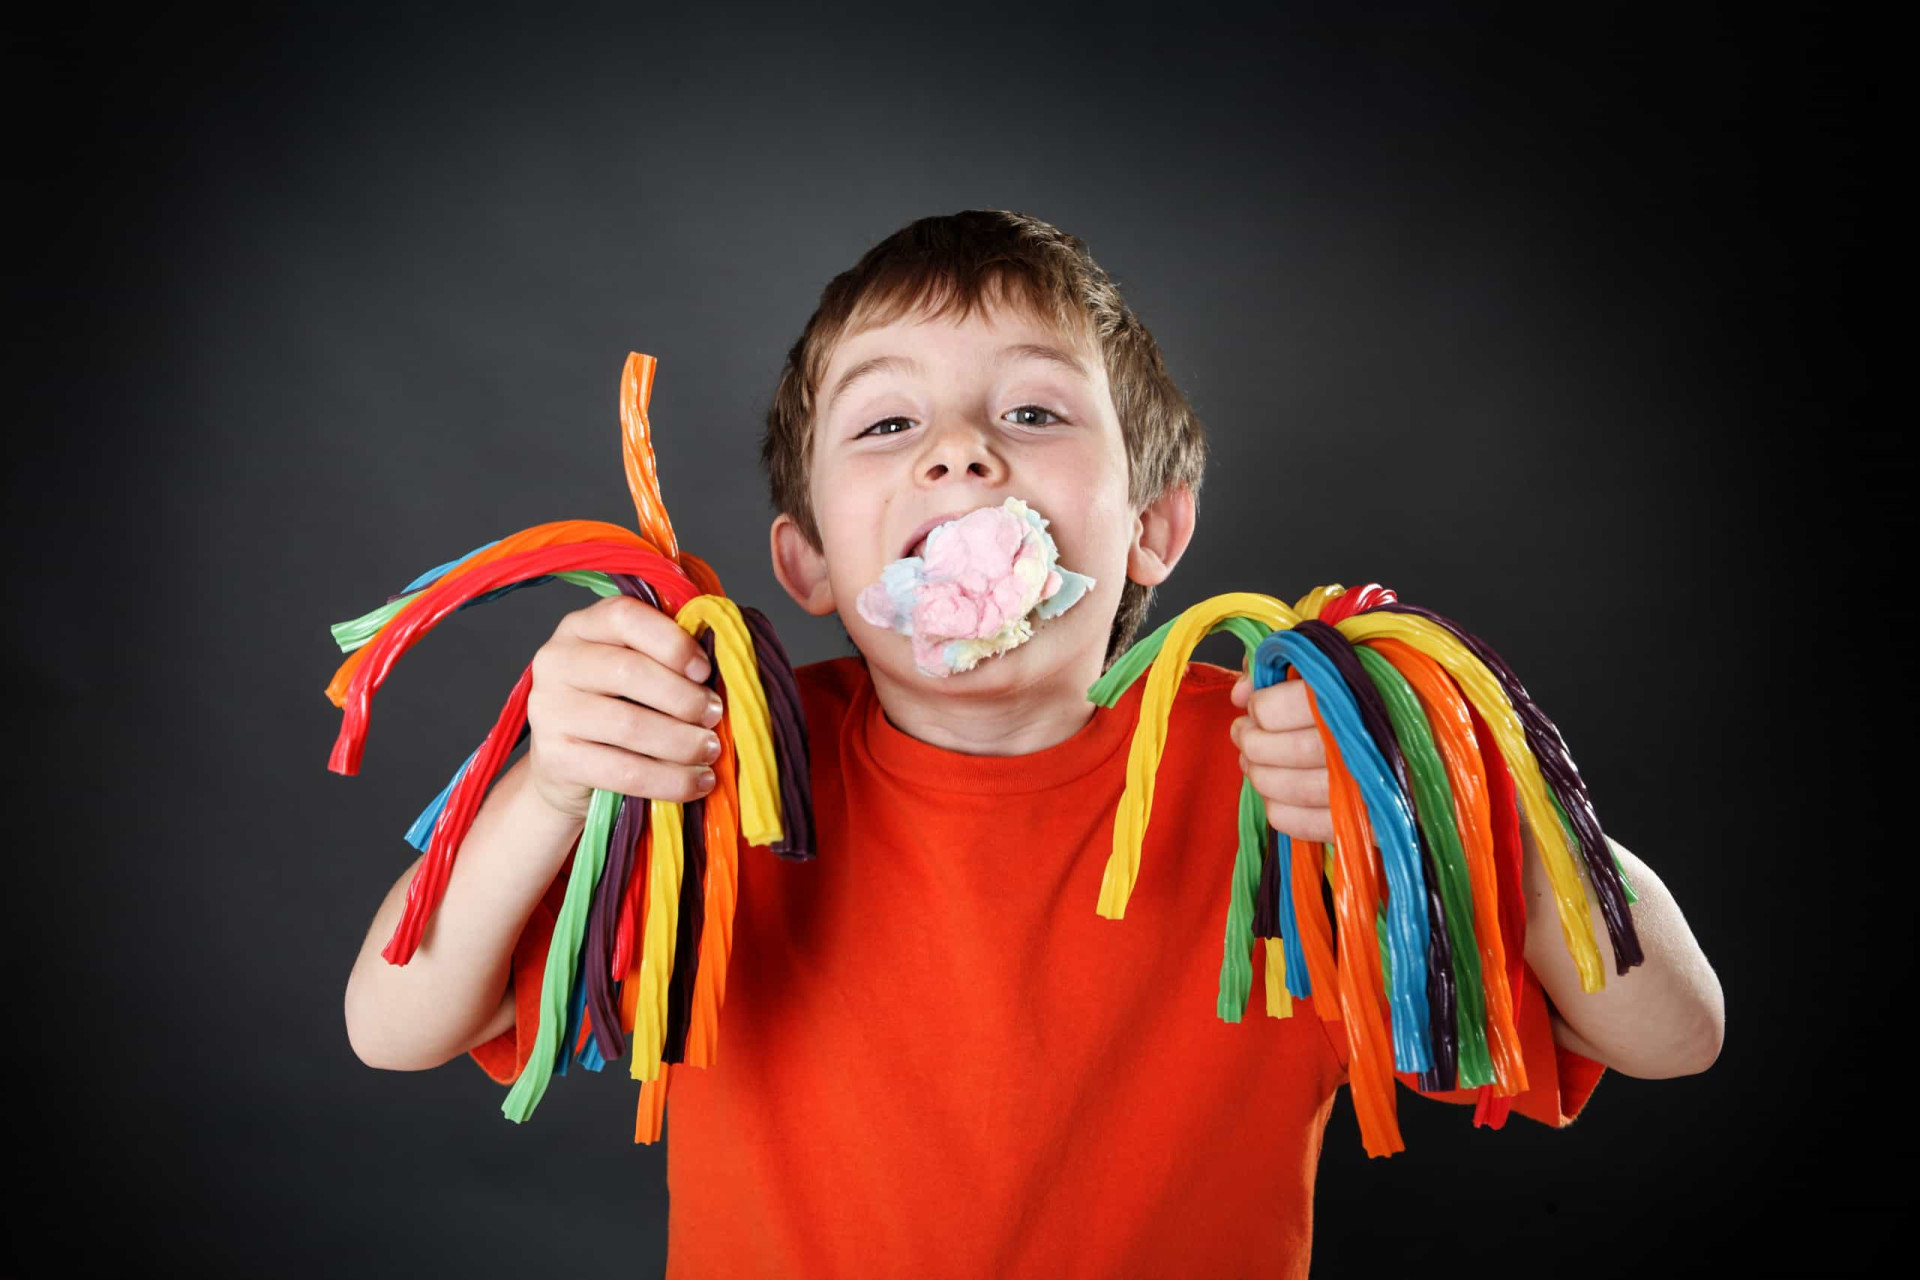 <p><span>A </span><span>study </span><span>found that artificial food coloring can increase hyperactivity in children.</span></p>